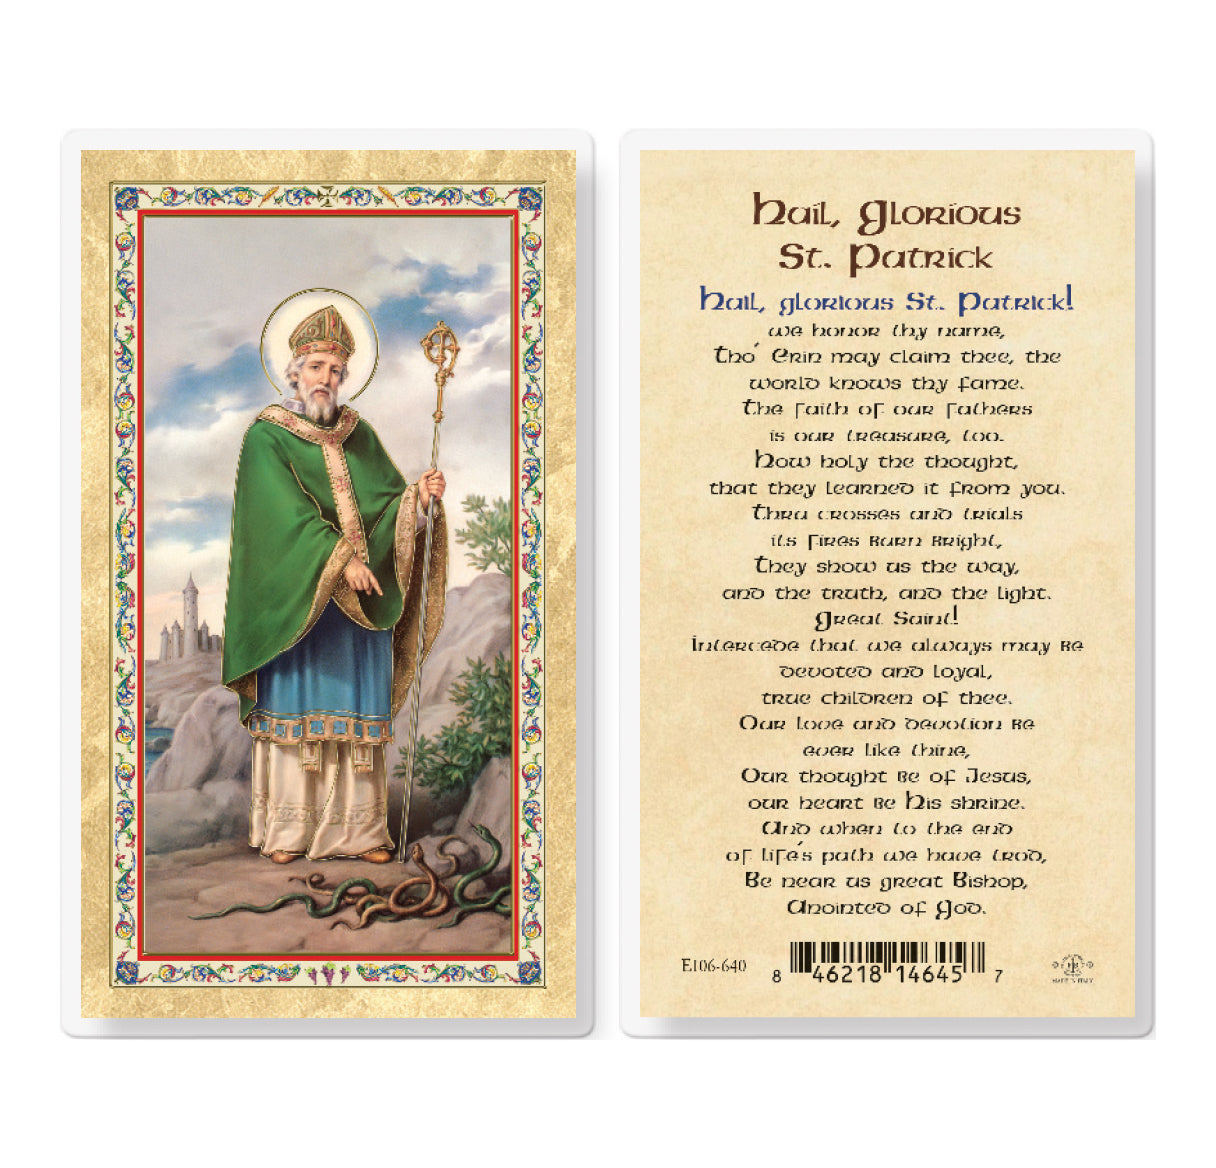 St. Patrick - Hail Glorious Saint Gold-Stamped Laminated Catholic Prayer Holy Card with Prayer on Back, Pack of 25